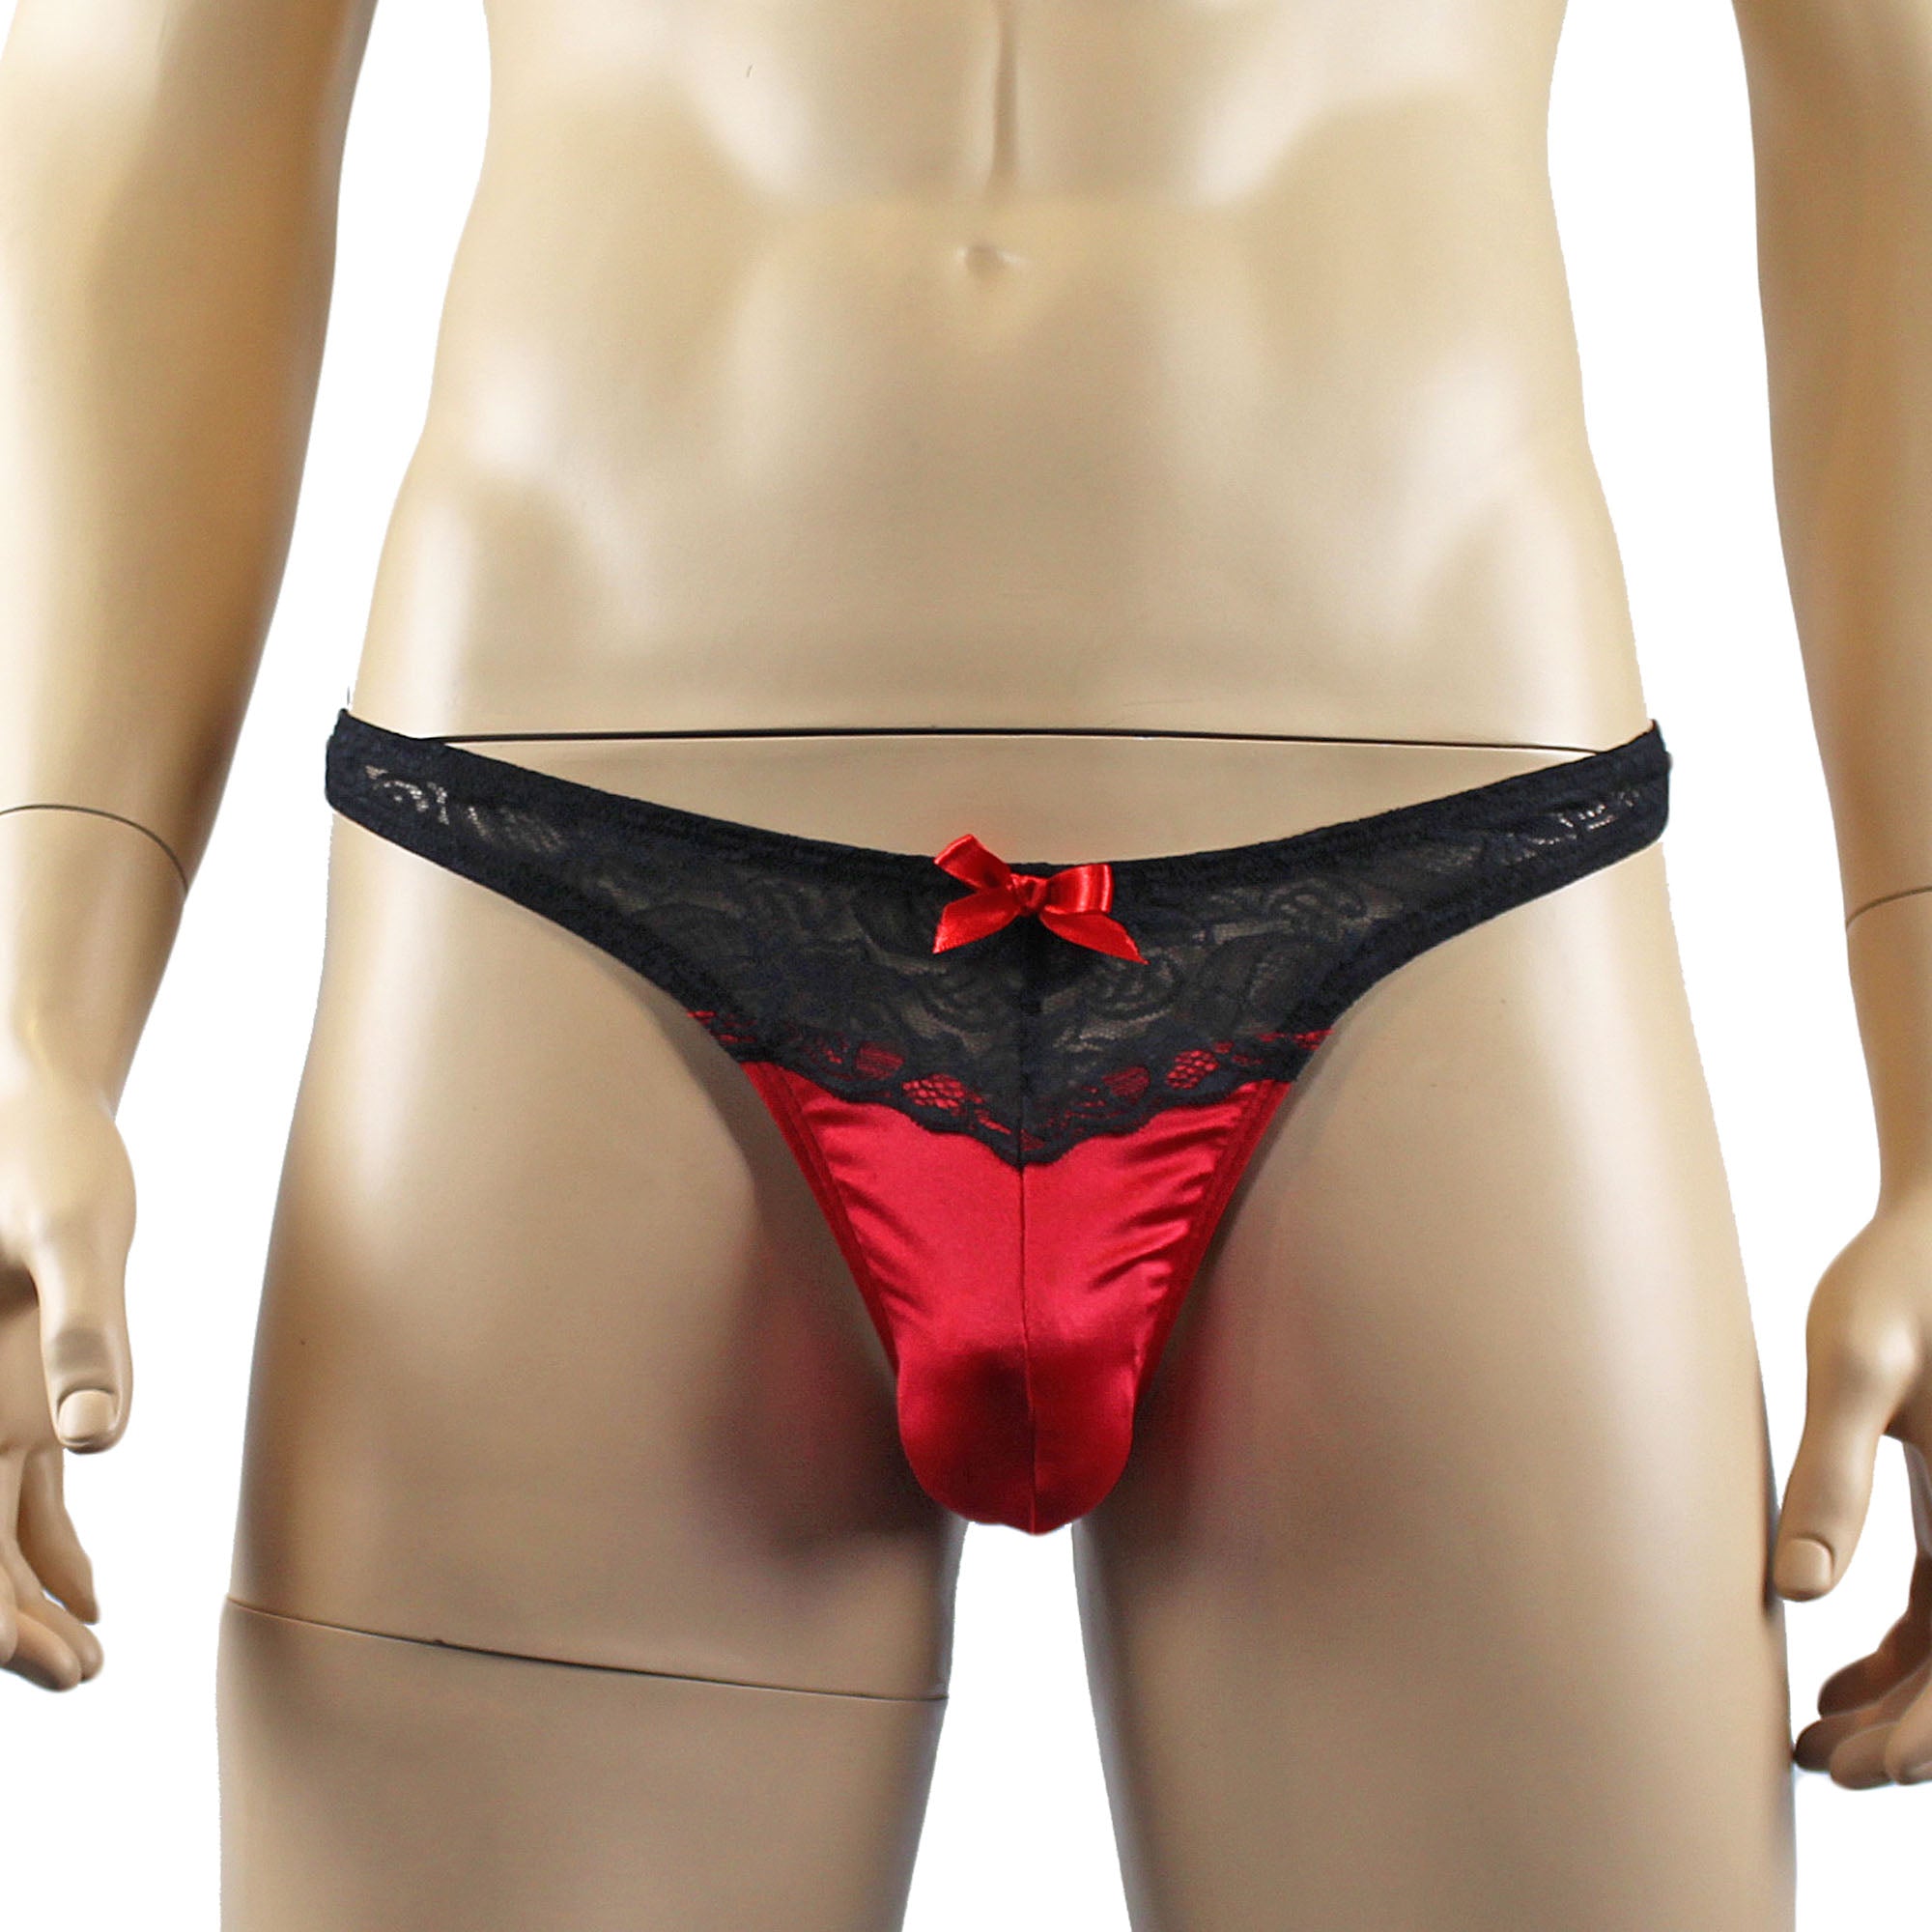 Mens Joanne Camisole Bustier Garter Top with Thong & Stockings - Sizes up to 3XL Red and Black Lace